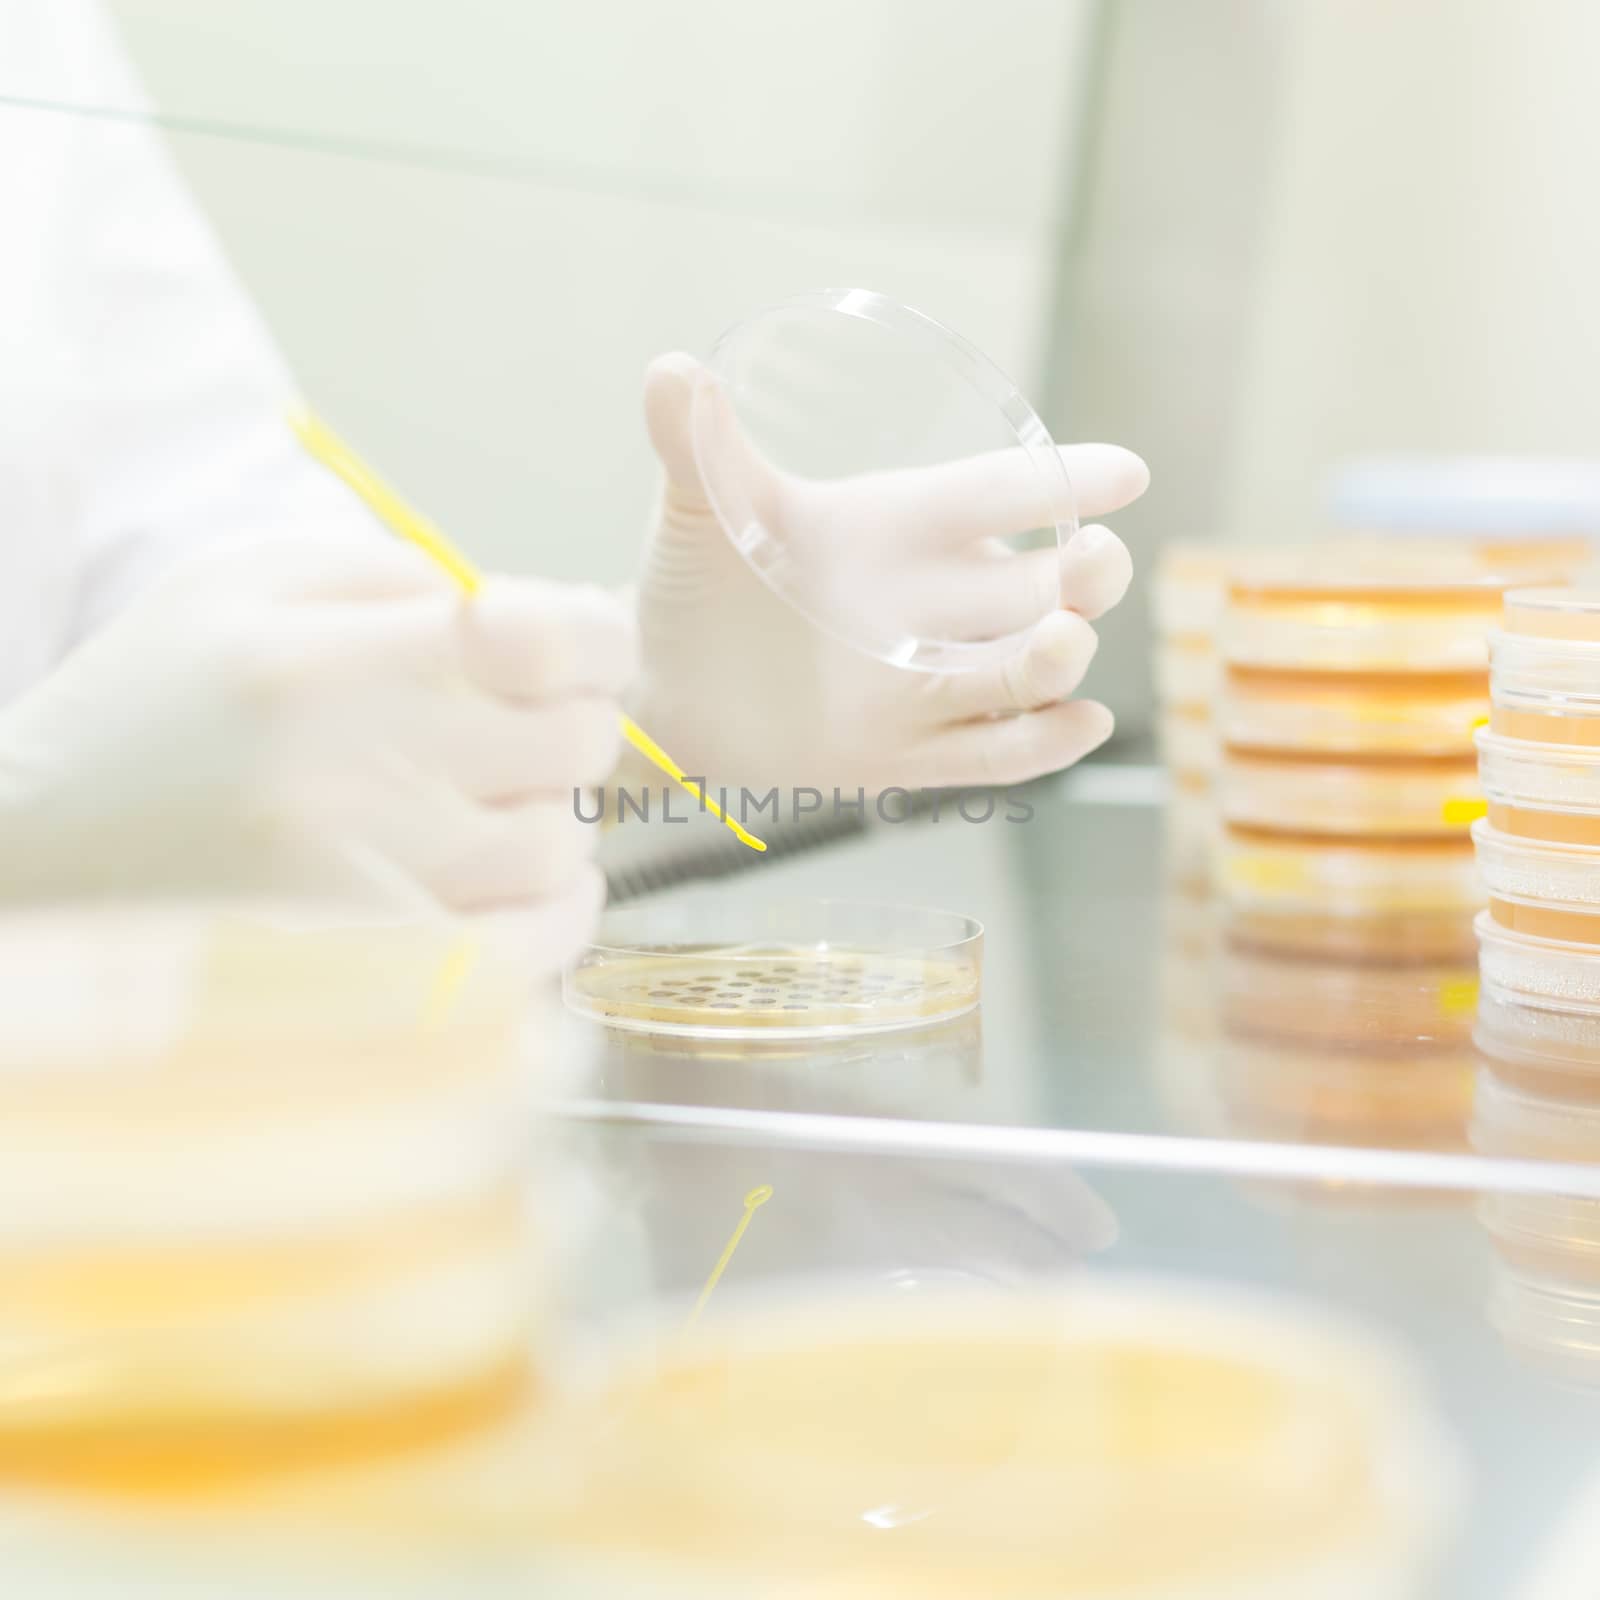 Female life science professional observing cell culture samples on LB agar medium in petri dish.  Scientist grafting bacteria in microbiological analytical laboratory .  